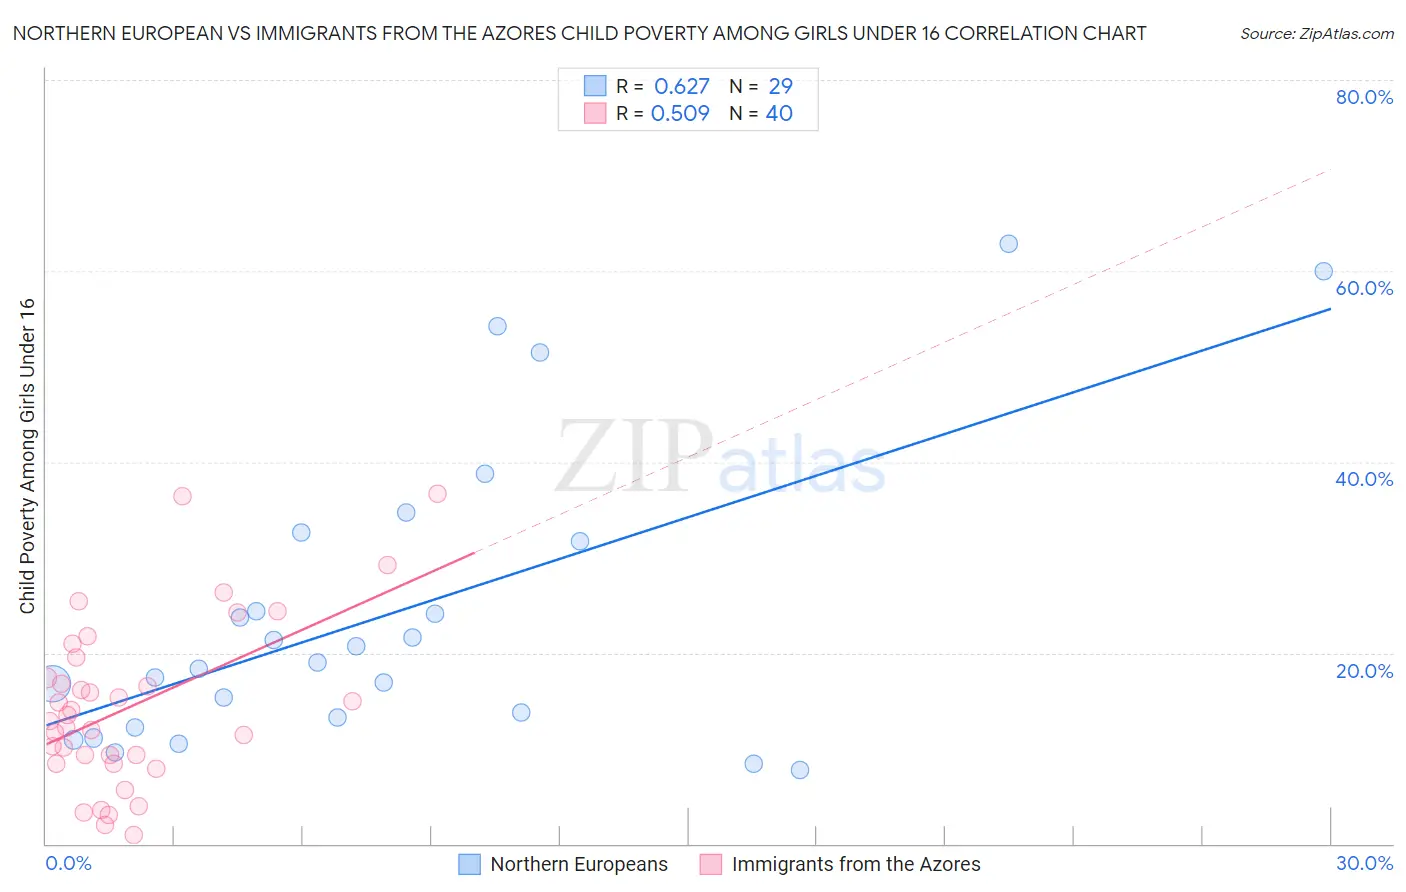 Northern European vs Immigrants from the Azores Child Poverty Among Girls Under 16